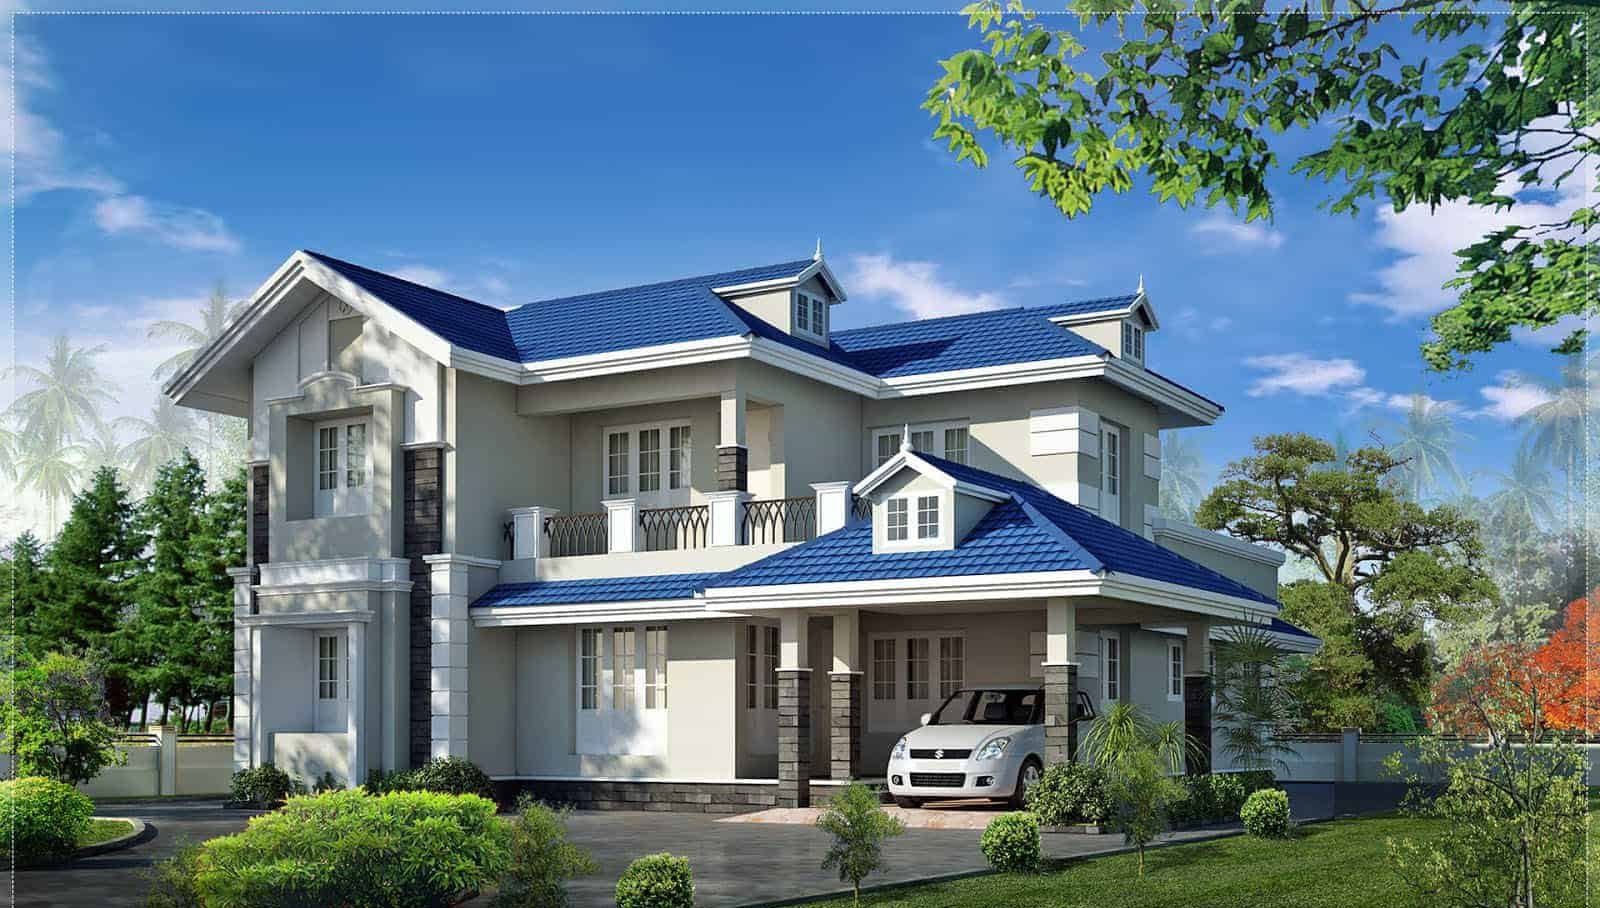 lovely blue and white two storey ،use design